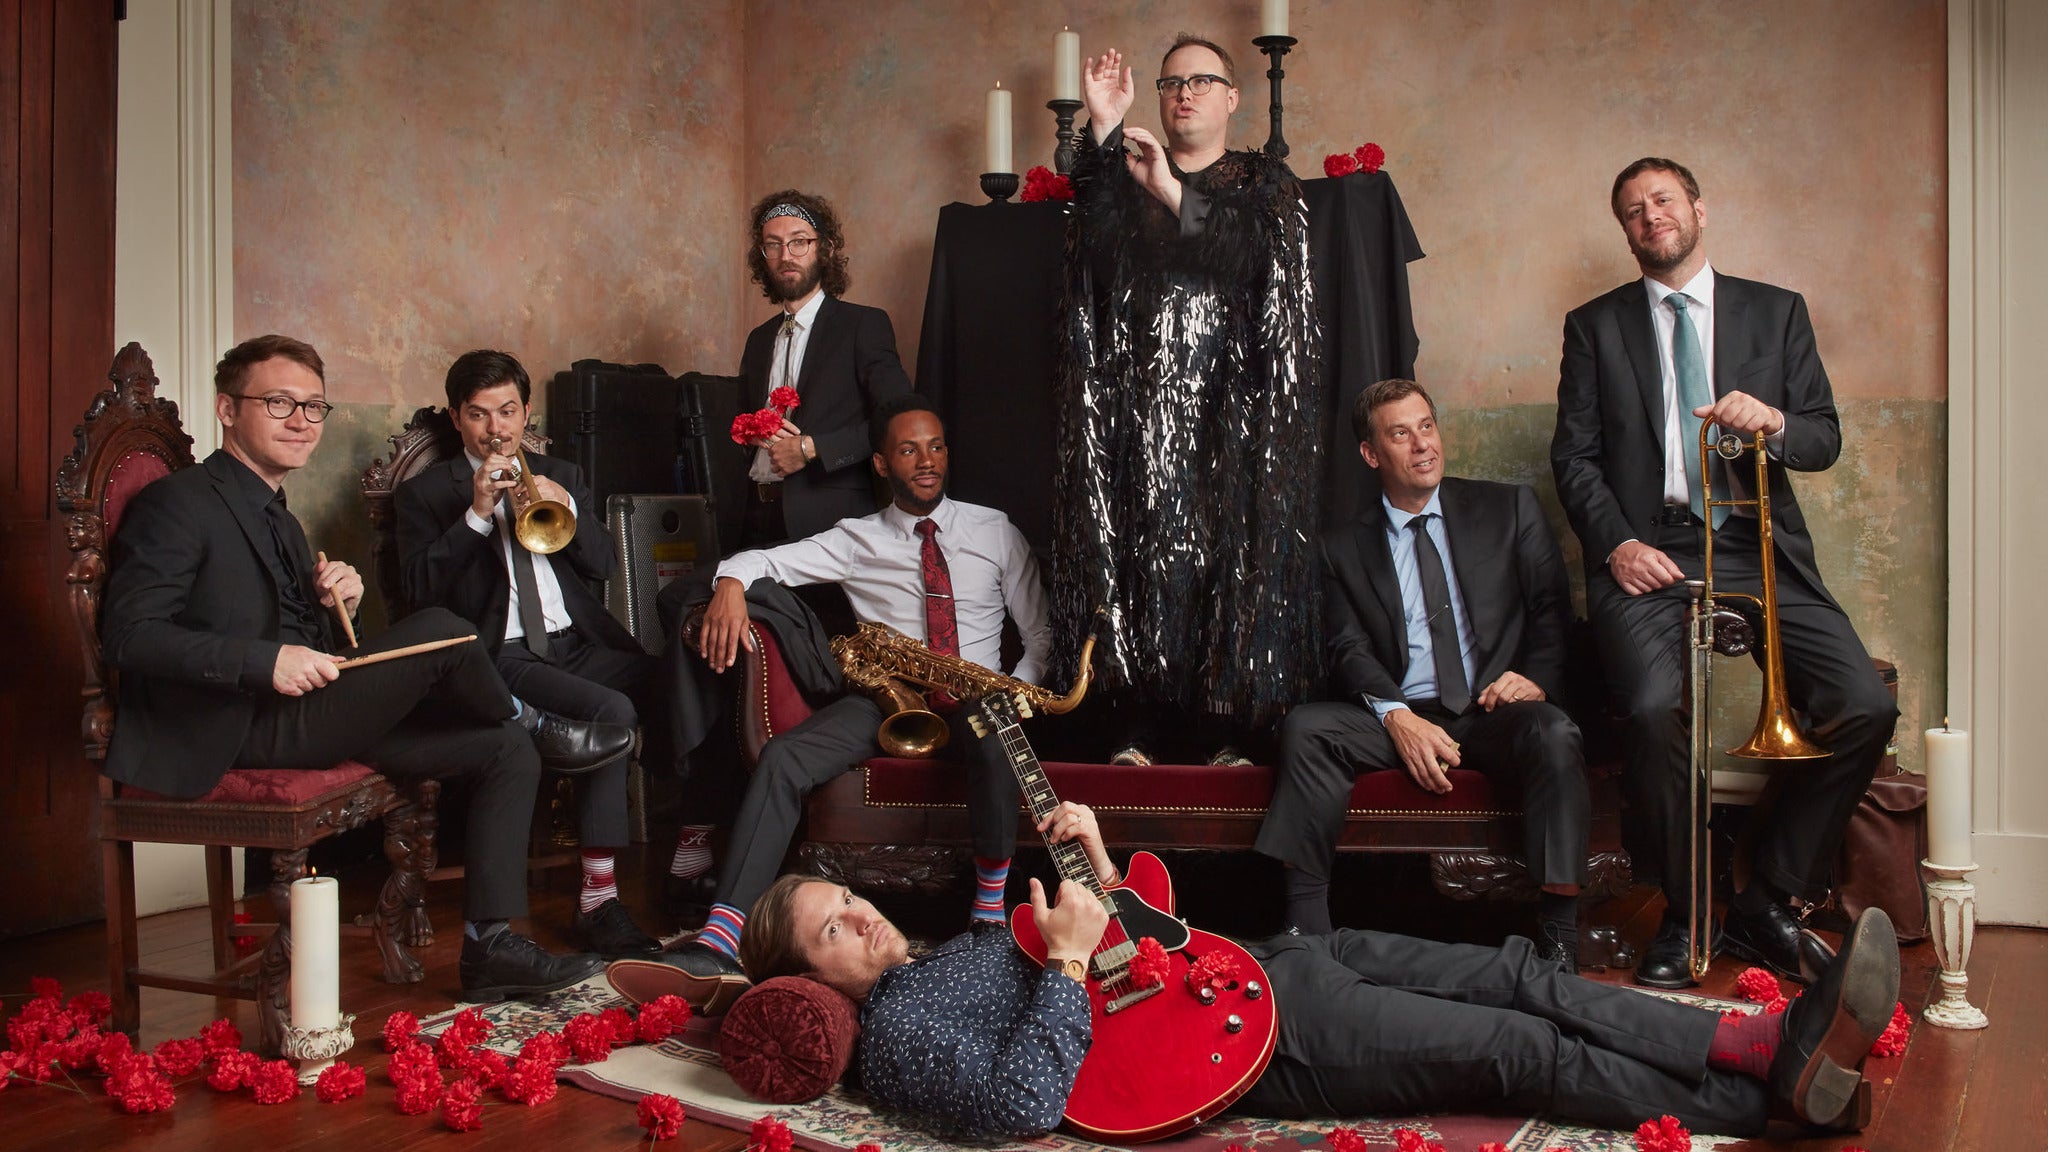 St. Paul and the Broken Bones in Nashville promo photo for The Grass is Greener VIP Exp. presale offer code